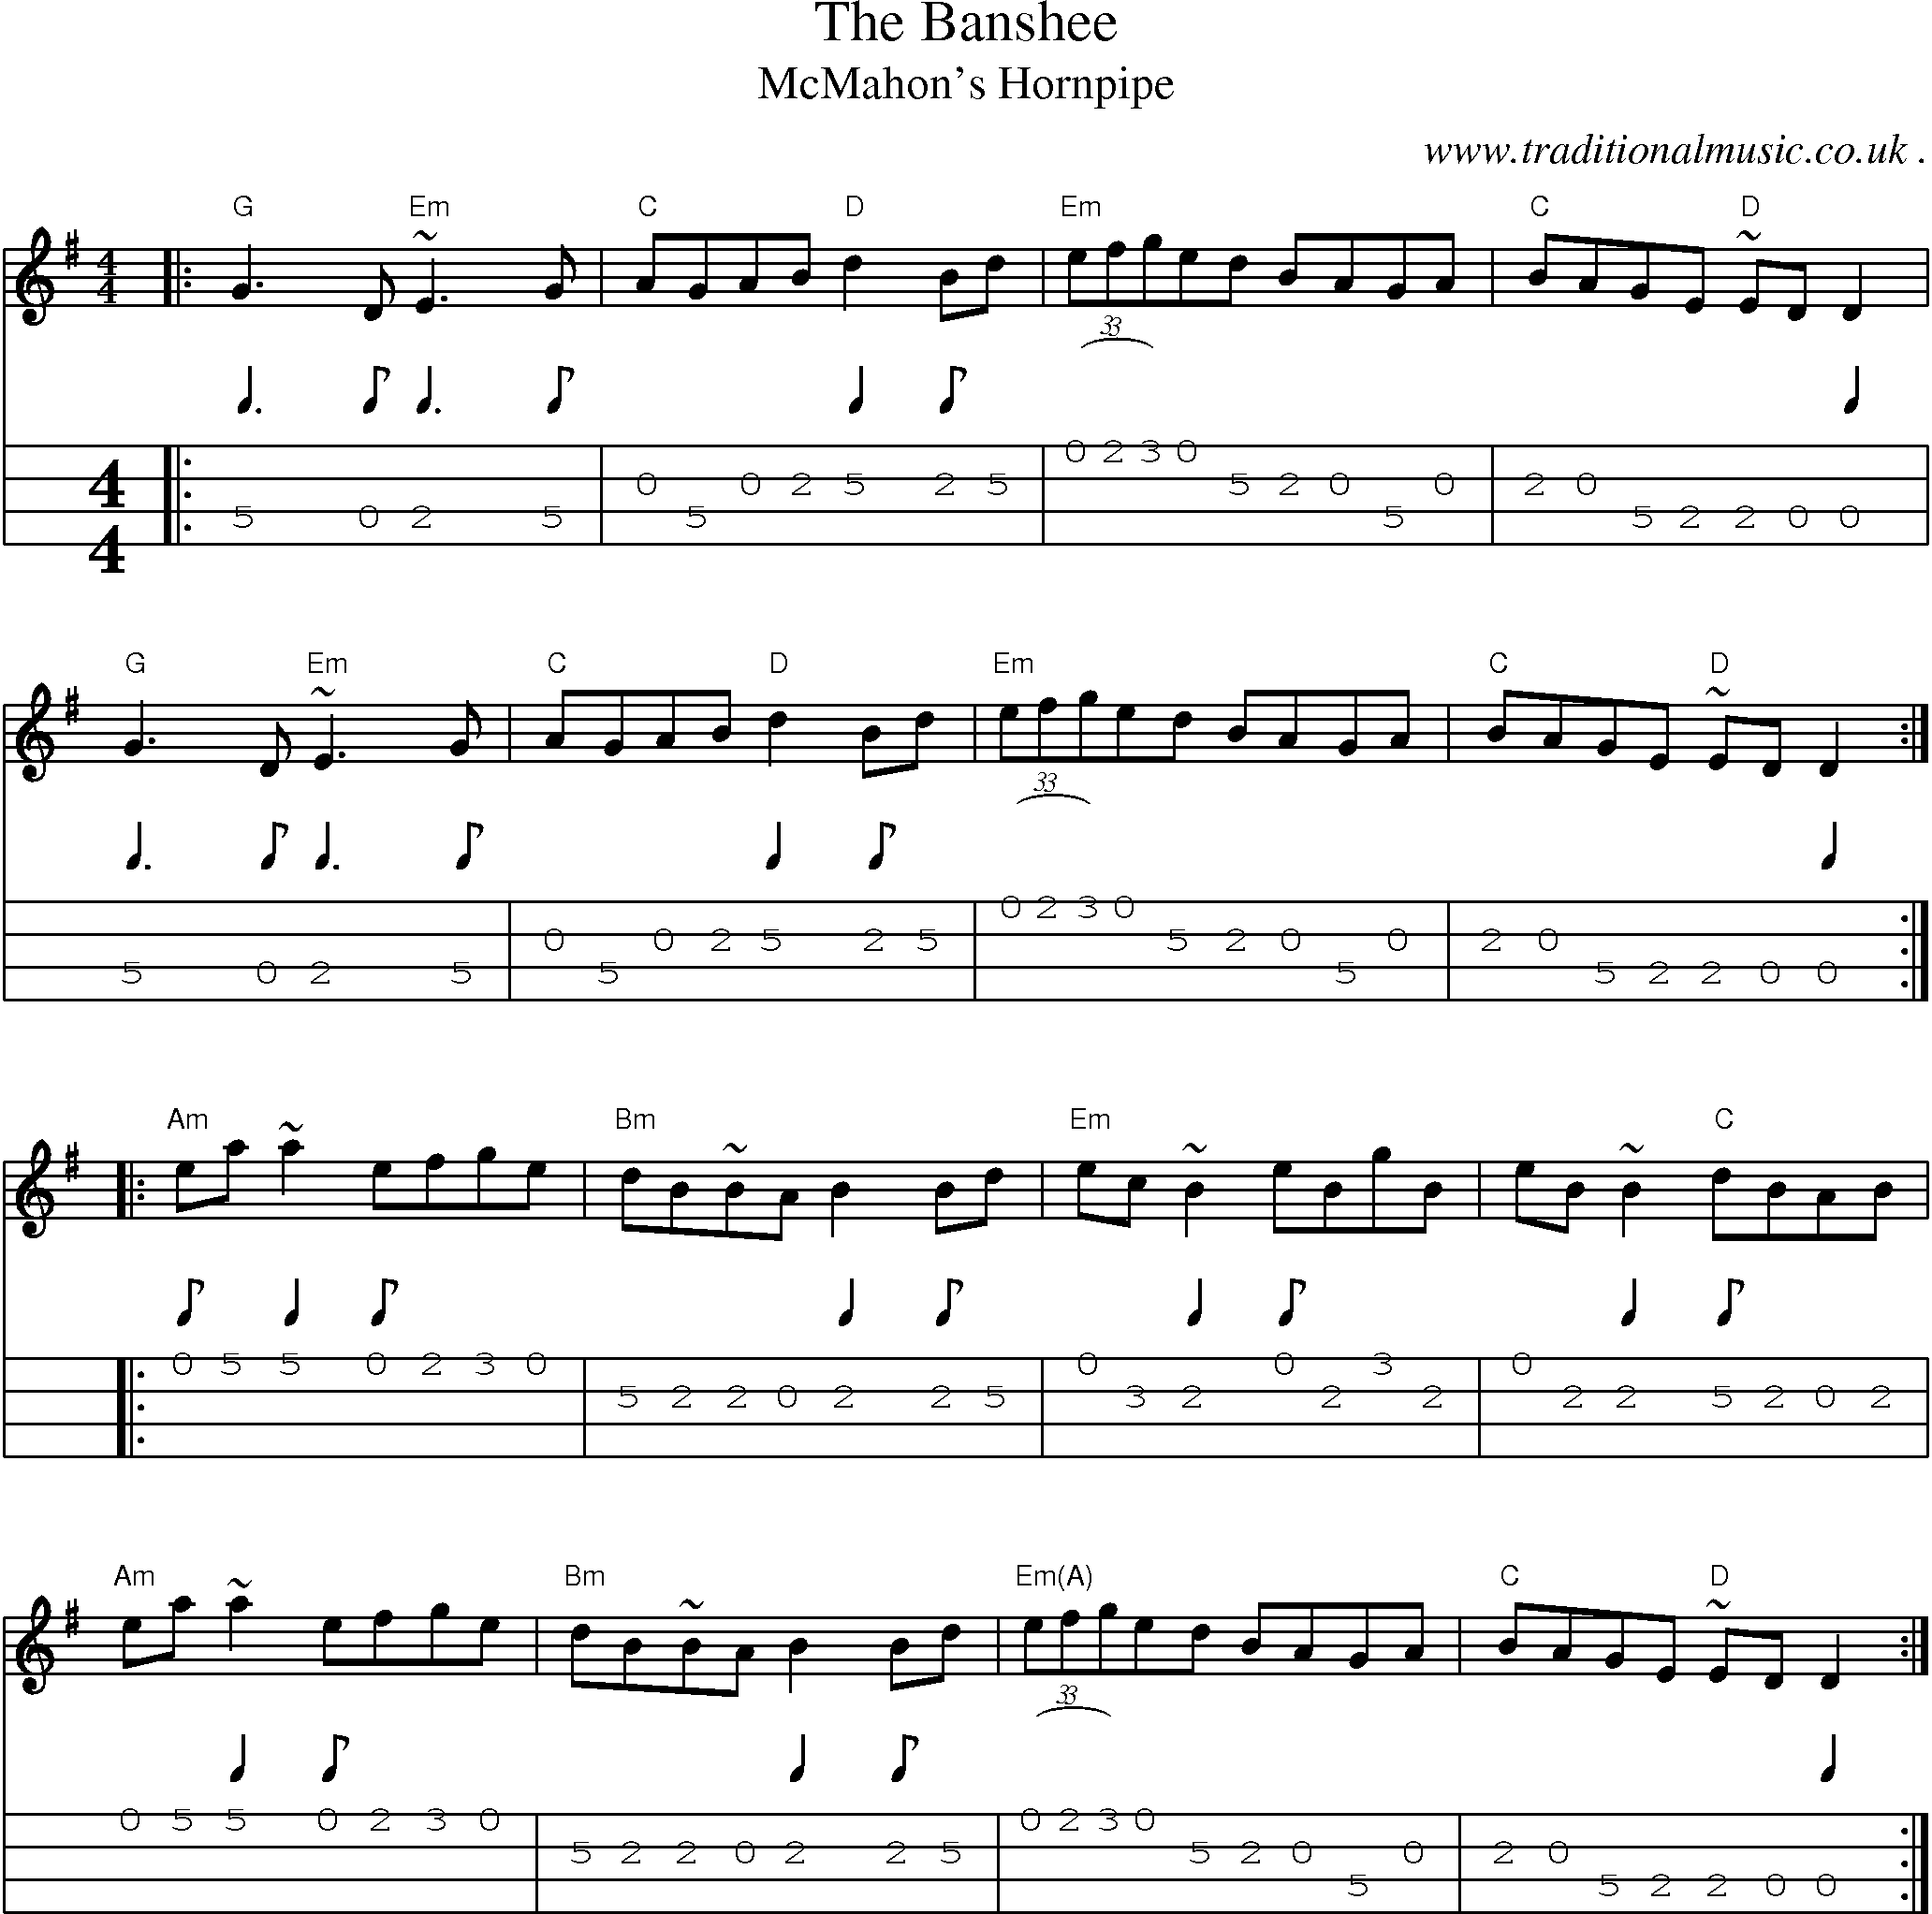 Music Score and Guitar Tabs for The Banshee